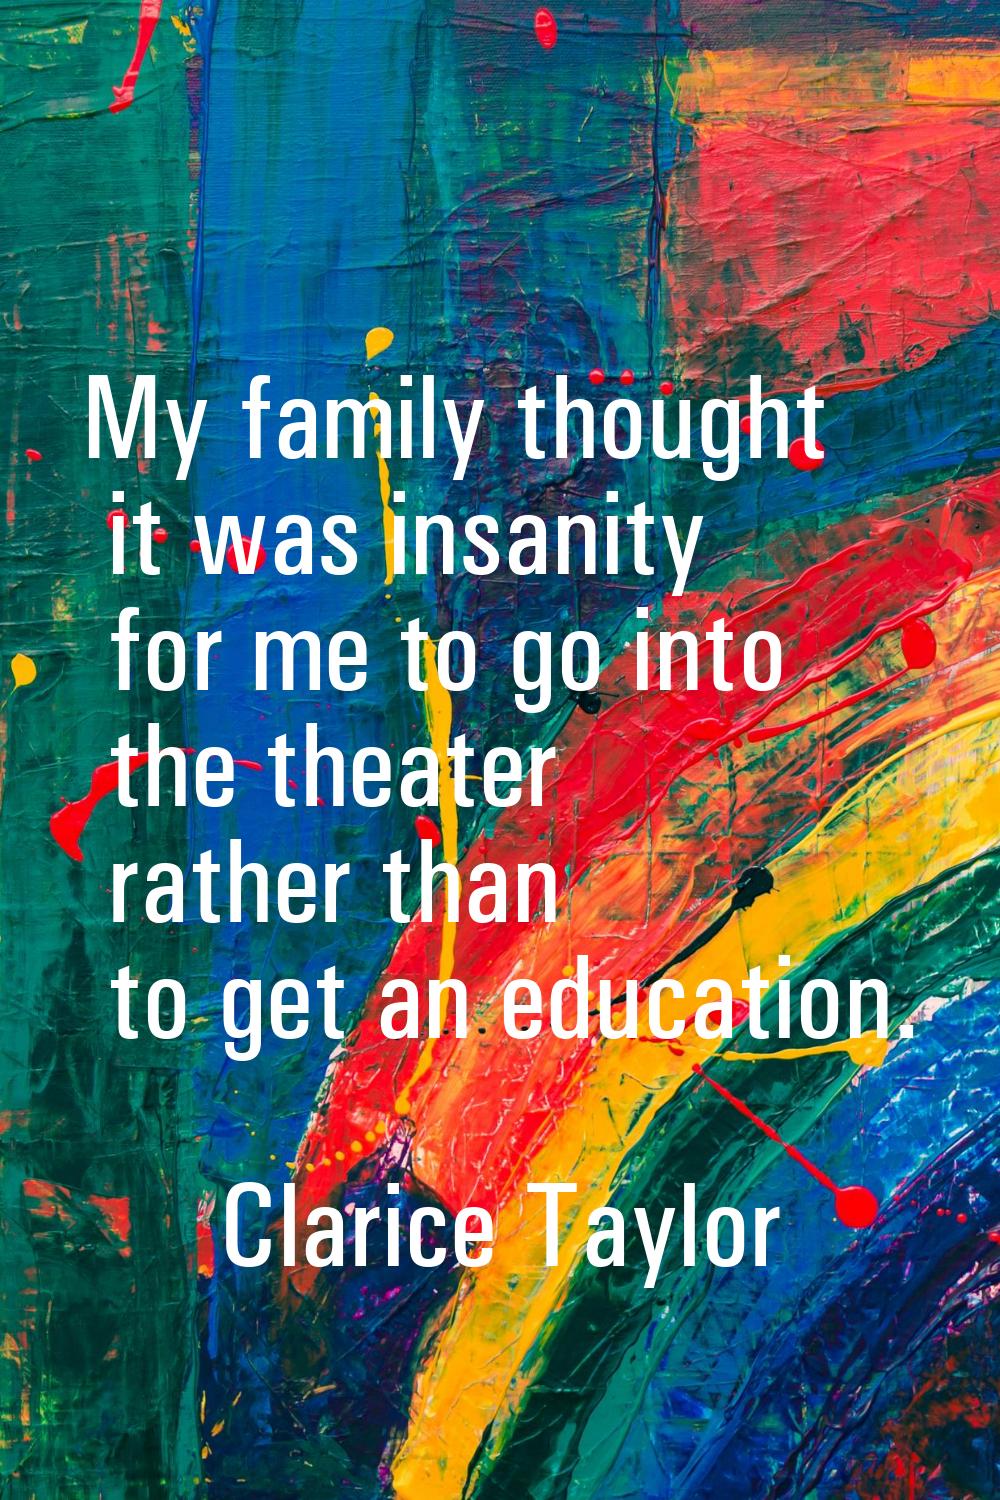 My family thought it was insanity for me to go into the theater rather than to get an education.